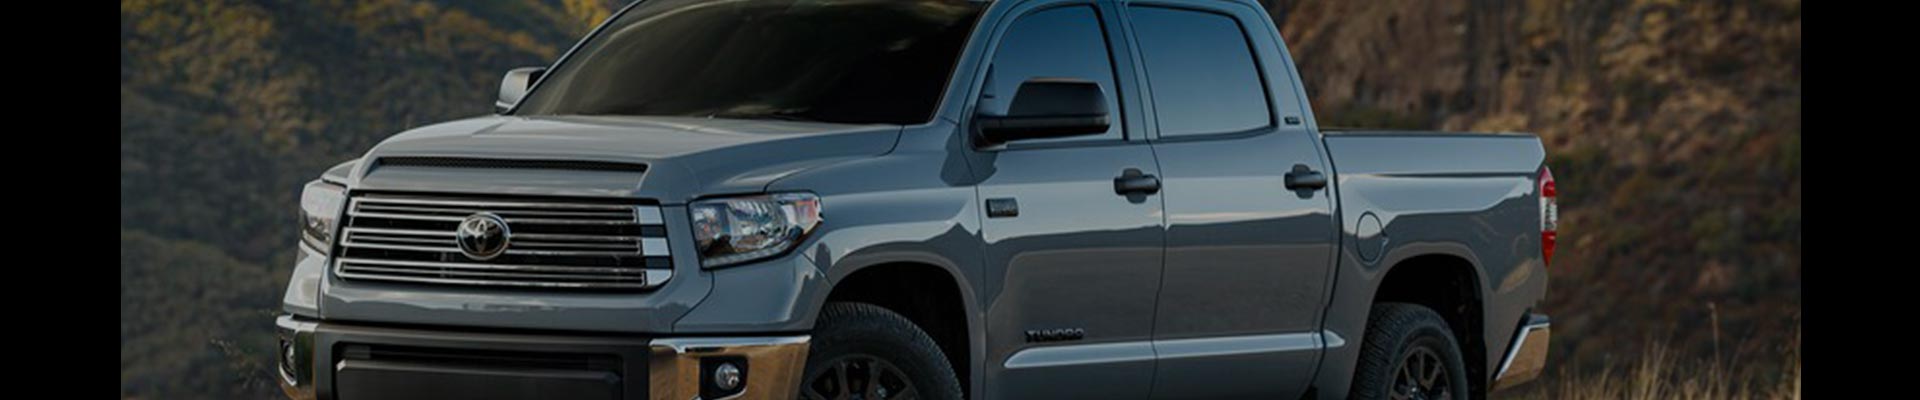 Shop Replacement and OEM 2013 Toyota Tundra Parts with Discounted Price on the Net